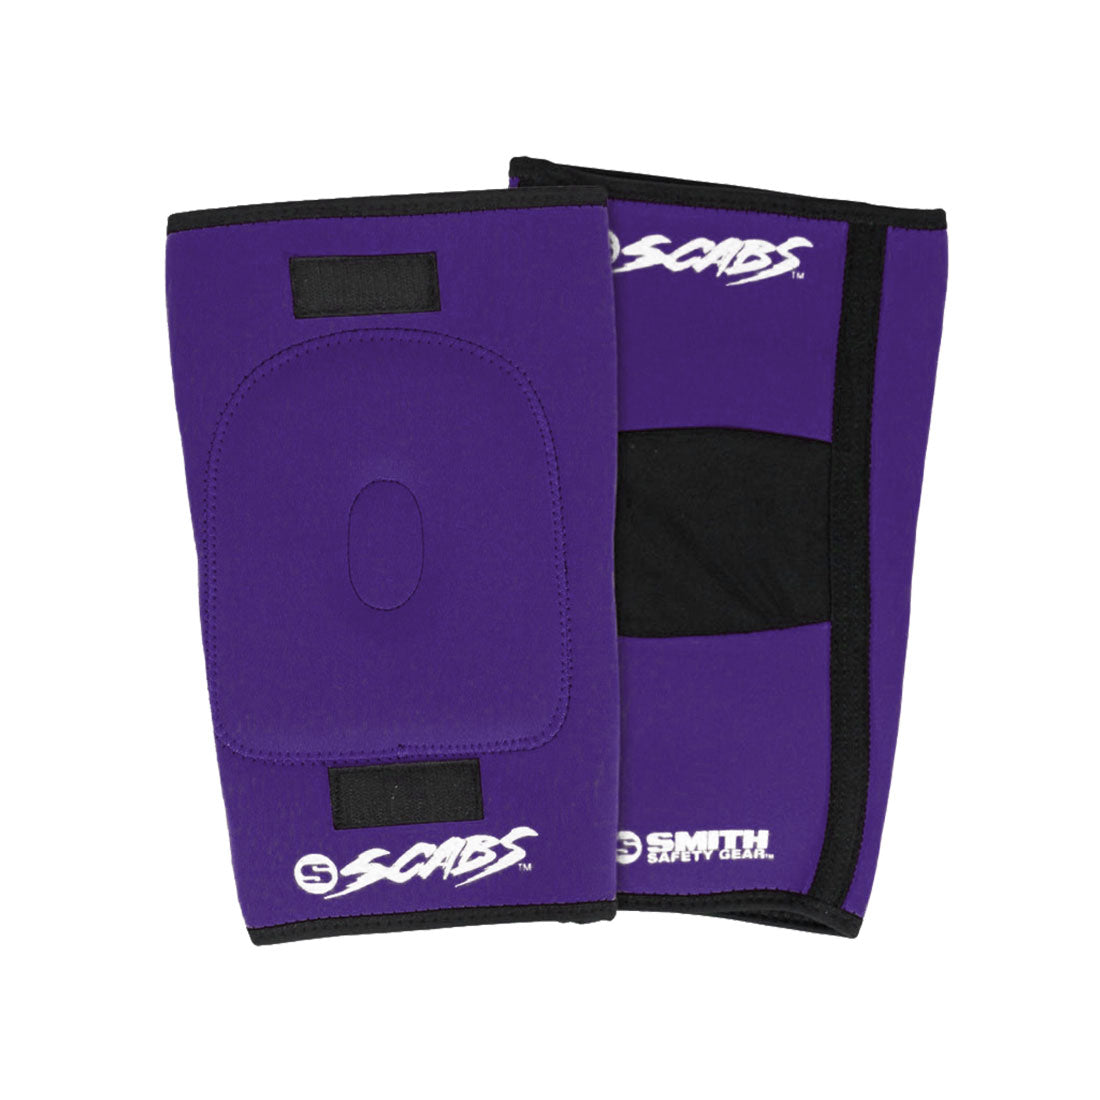 Smith Scabs Knee Gasket - Coloured Purple Protective Gear